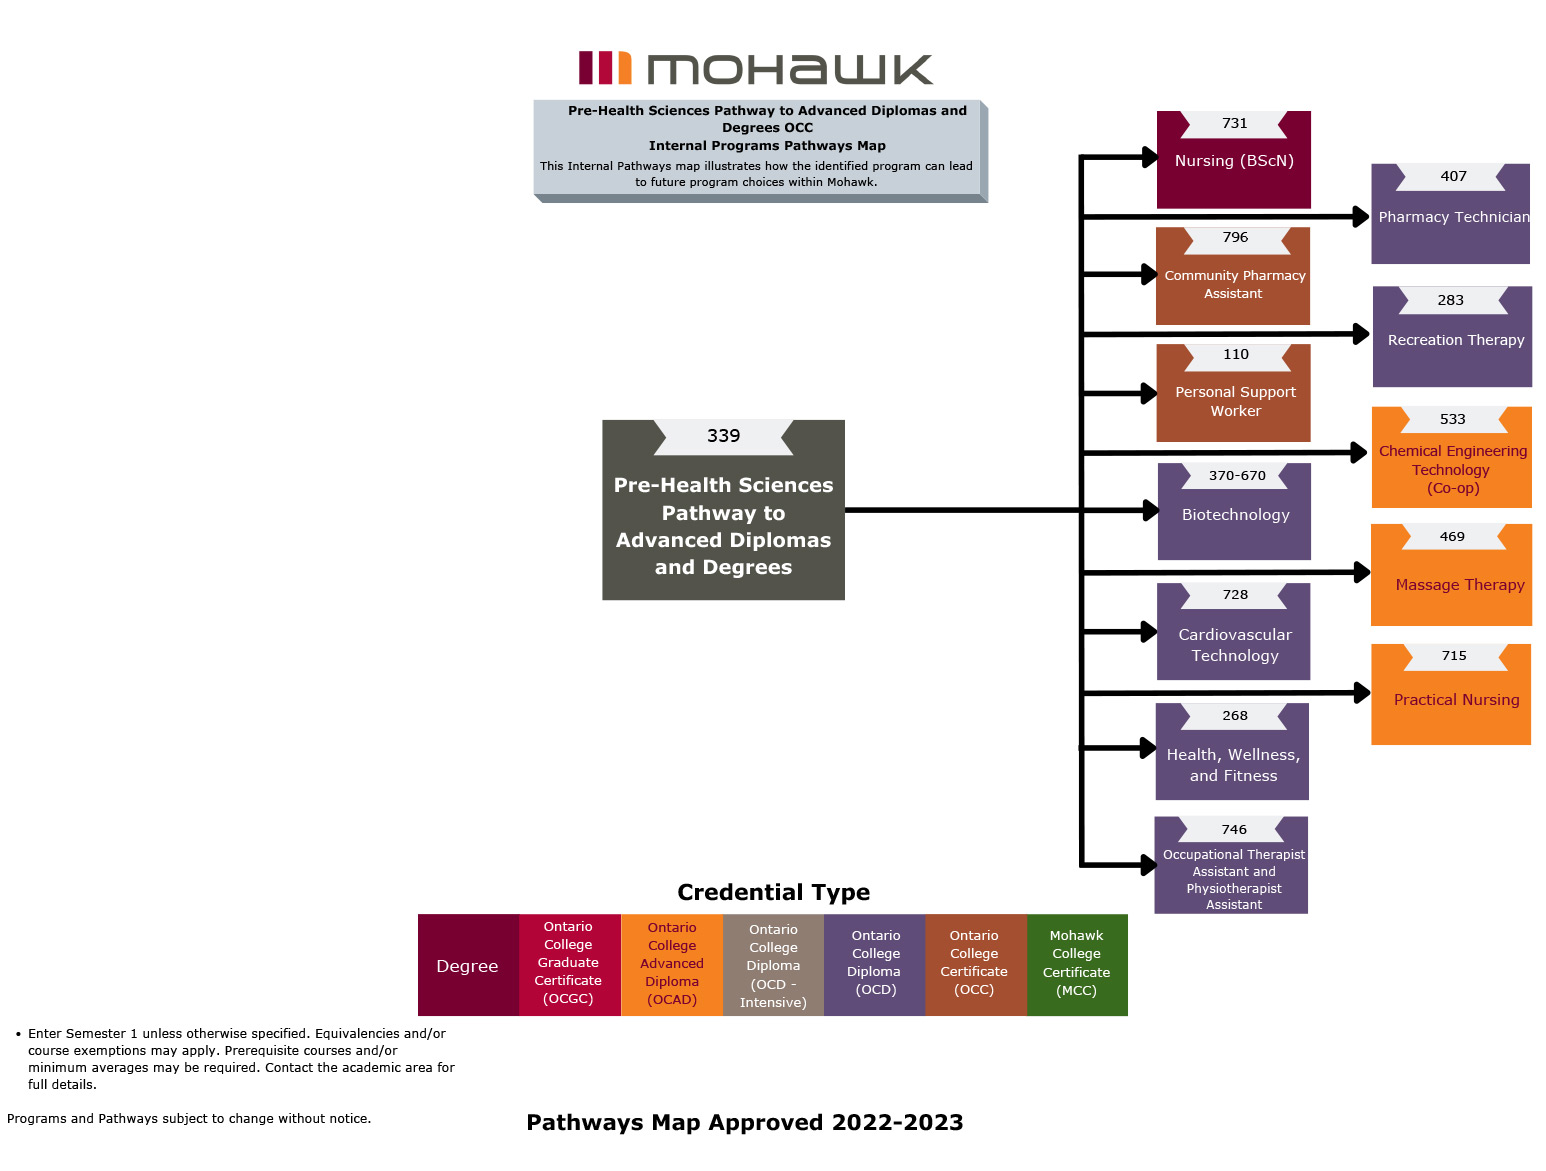 Pre-Health Sciences Pathway to Advanced Diplomas and Degrees pathways map